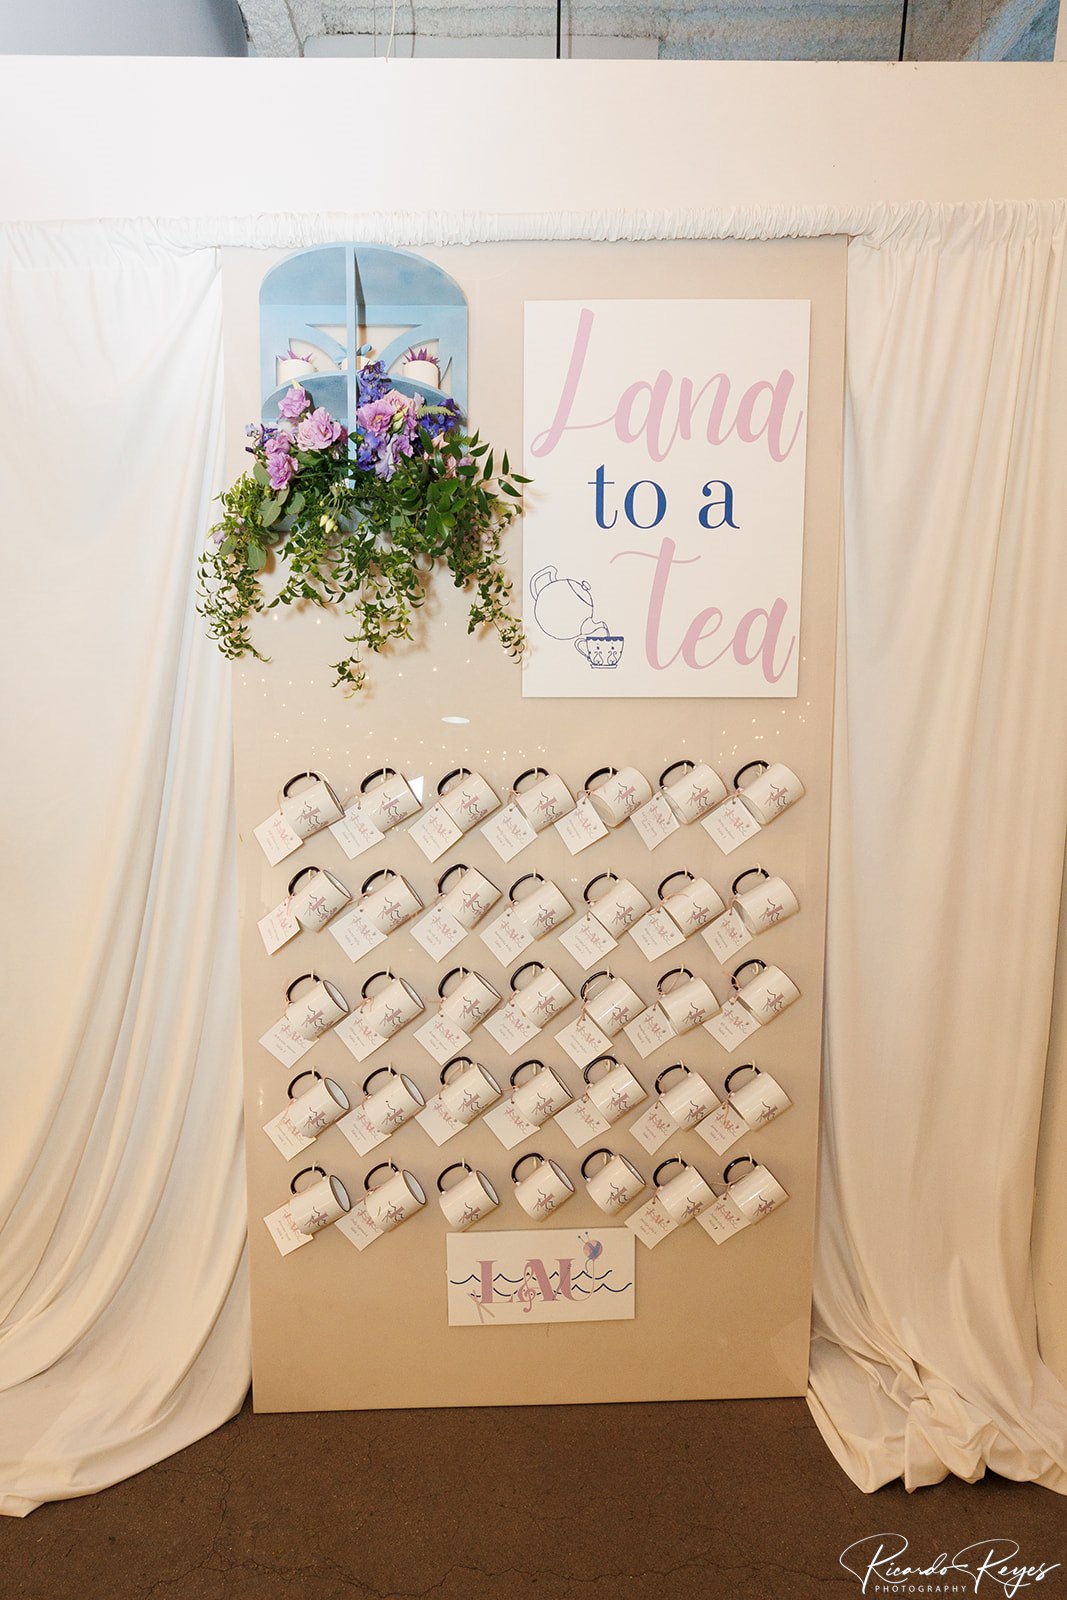 Favors and Seating chart for Lana to a Tea All About Lana Bat Mitzvah Party at VisArts in Rockville, MD | Pop Color Events | Adding a Pop of Color to Bar & Bat Mitzvahs in DC, MD & VA | Photo by: Ricardo Reyes Photography